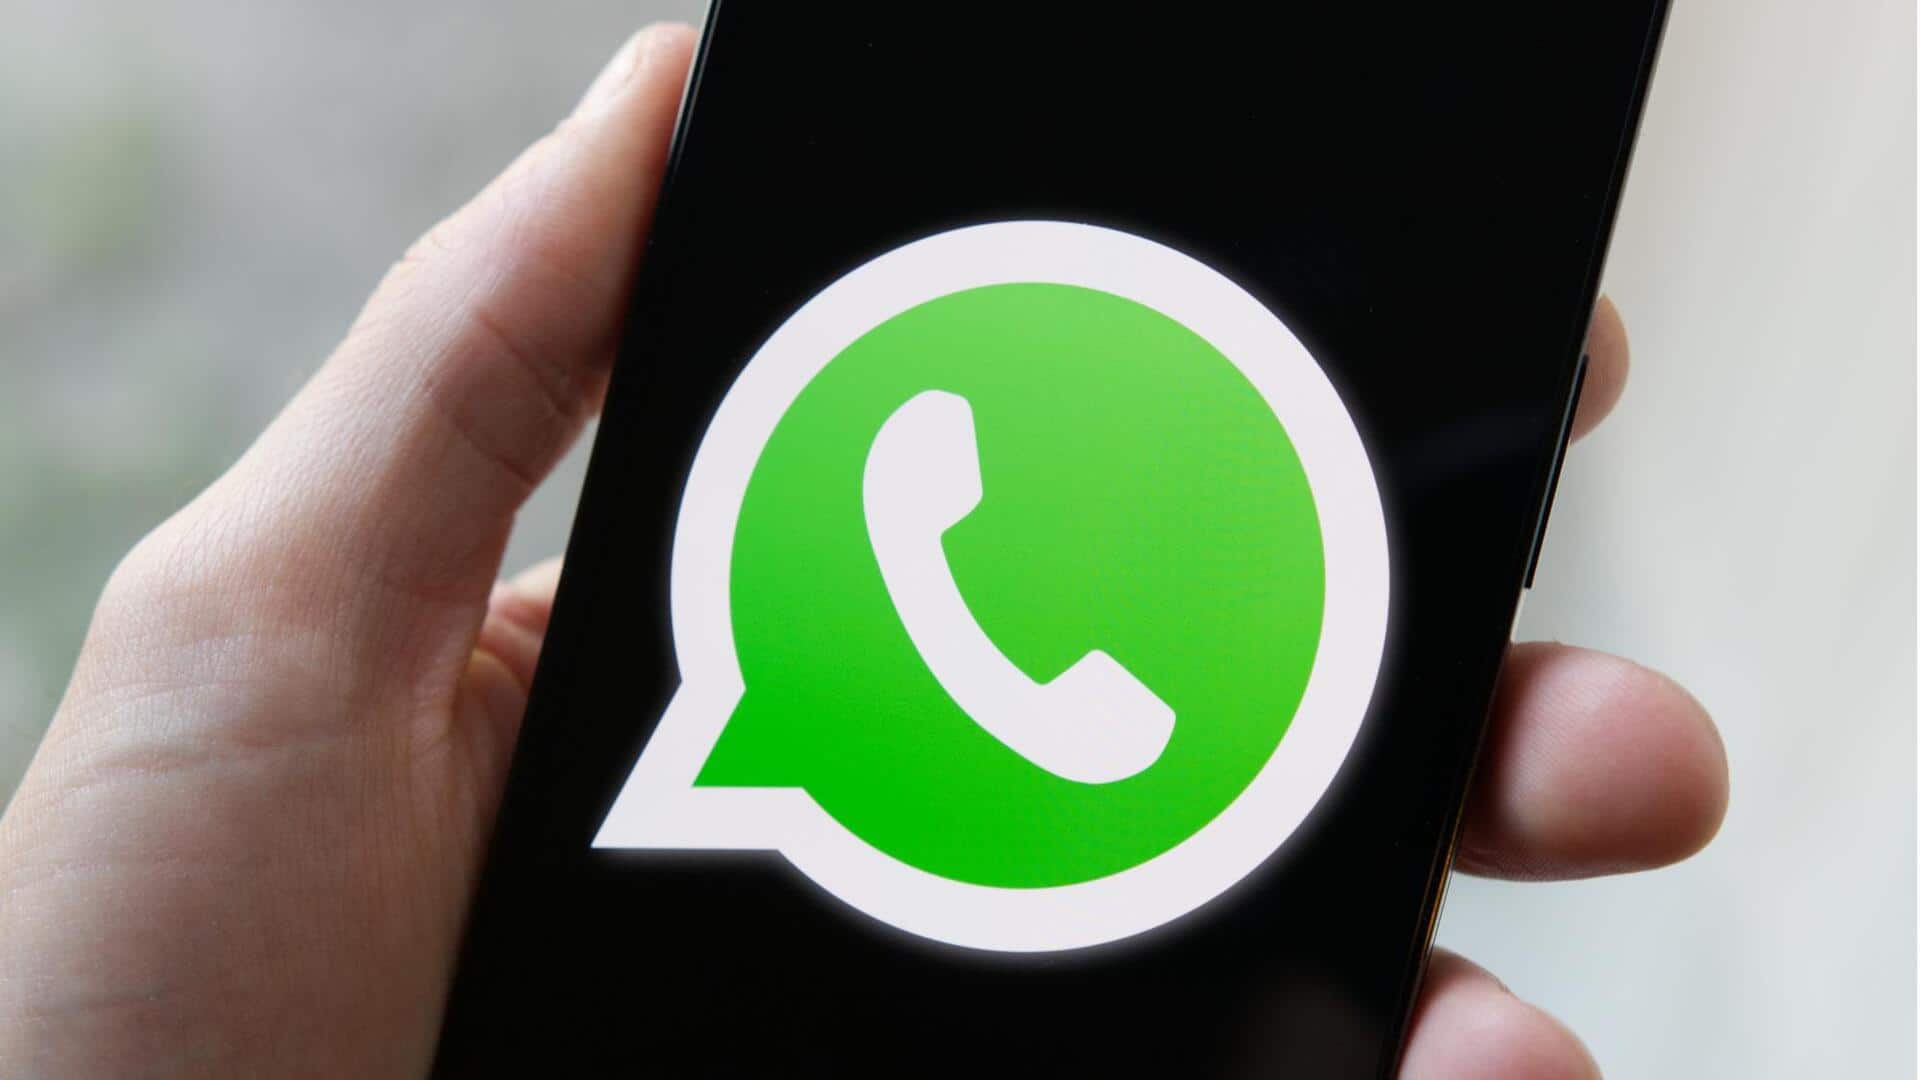 WhatsApp fixes camera bug in Android beta: Details here